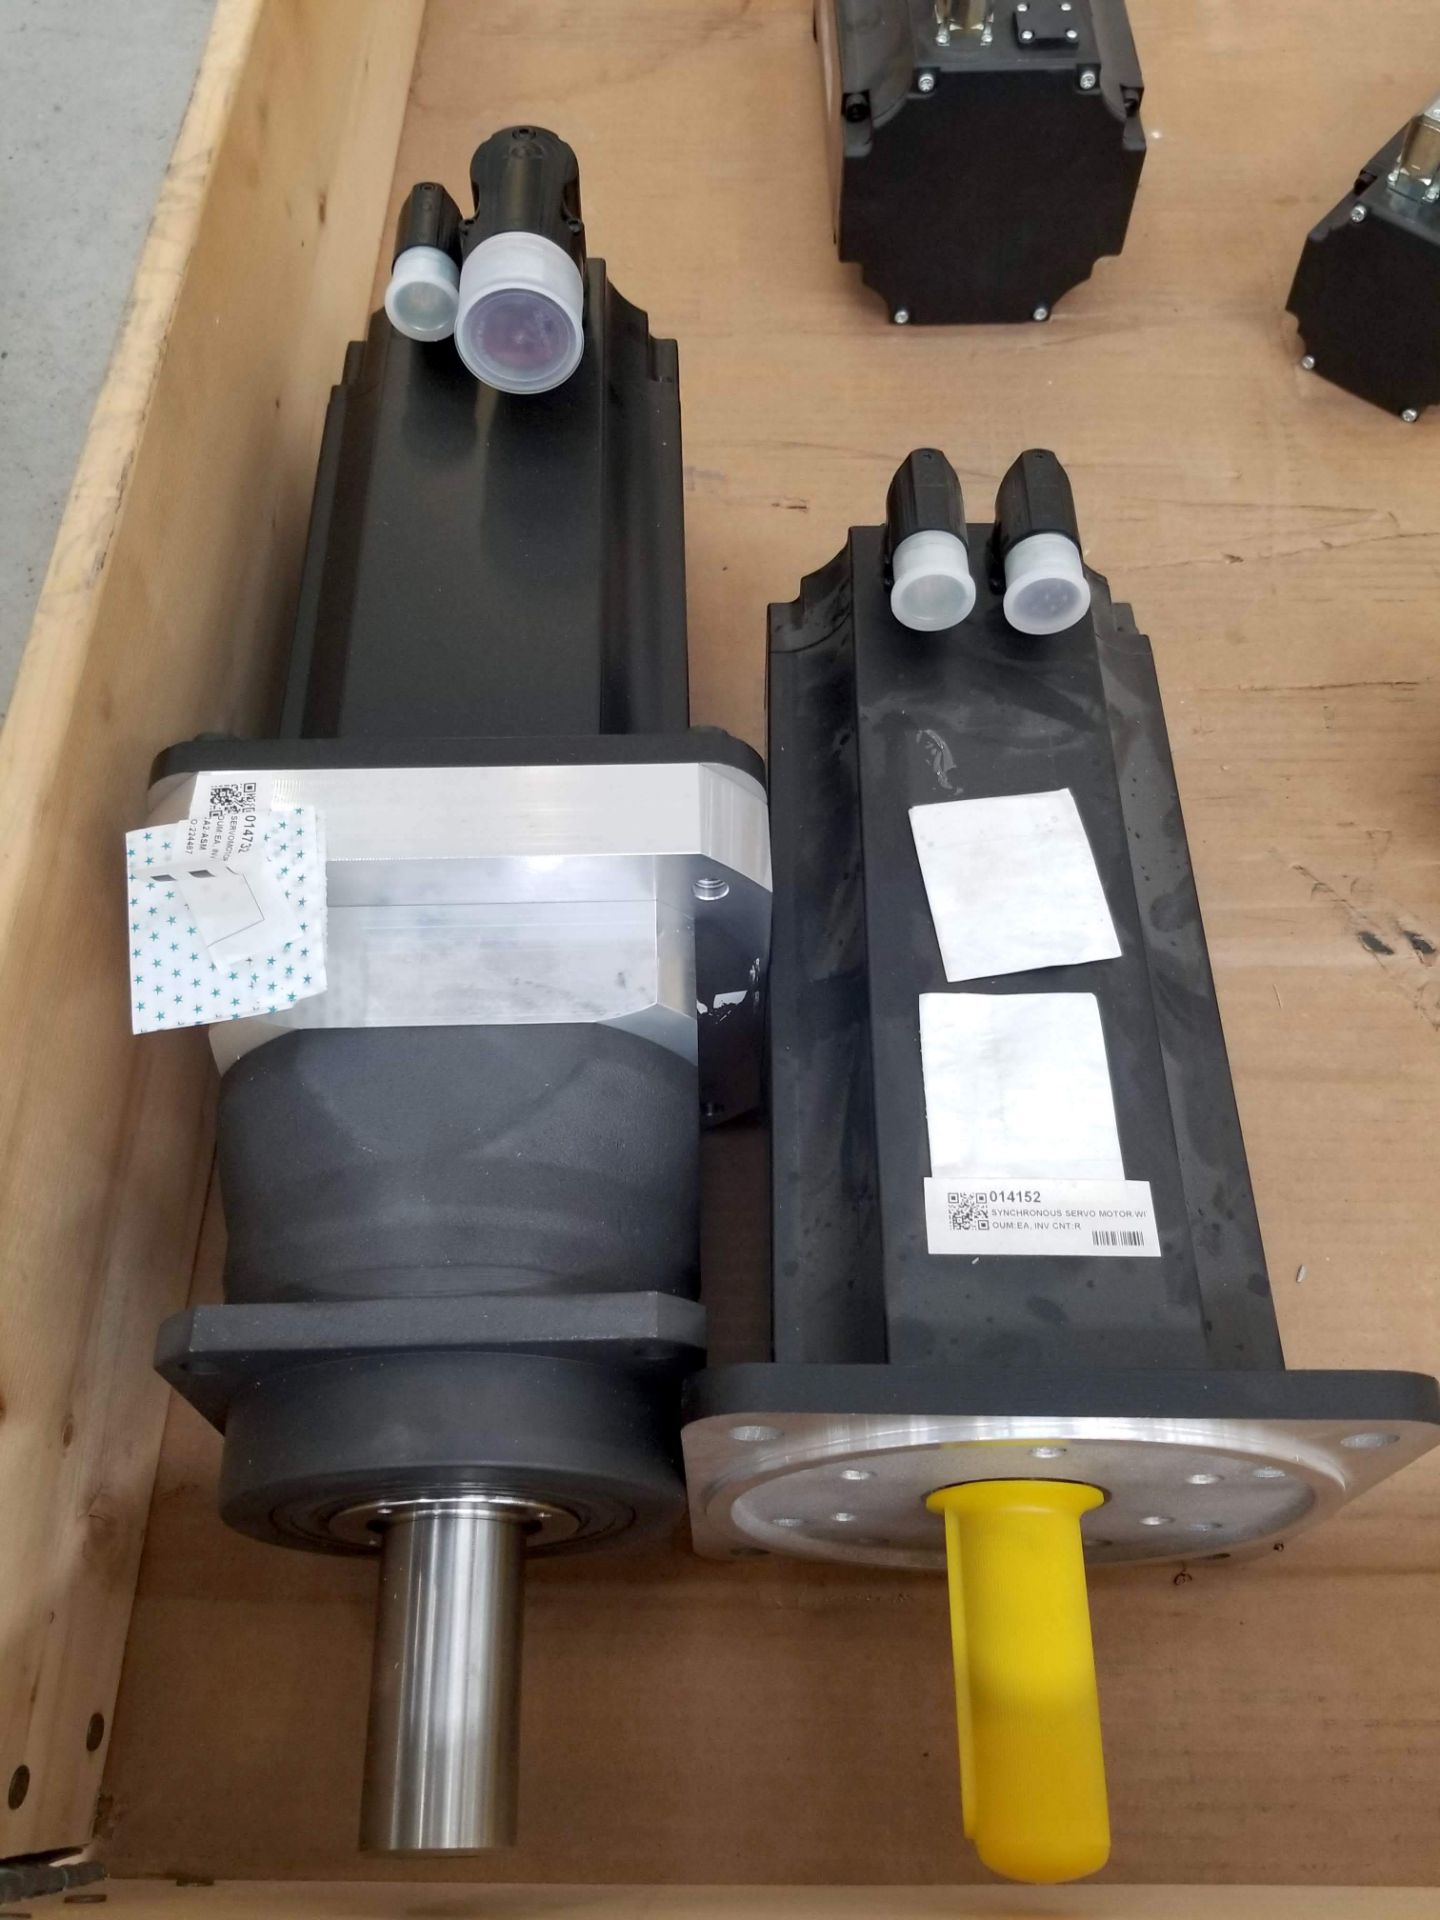 LOT - (6) B&R MOTOR & GEARBOX, SHUTTER N350. MOTOR & GEARBOX ROBOT. SERVOMOTOR AND GEARBOX. - Image 16 of 21